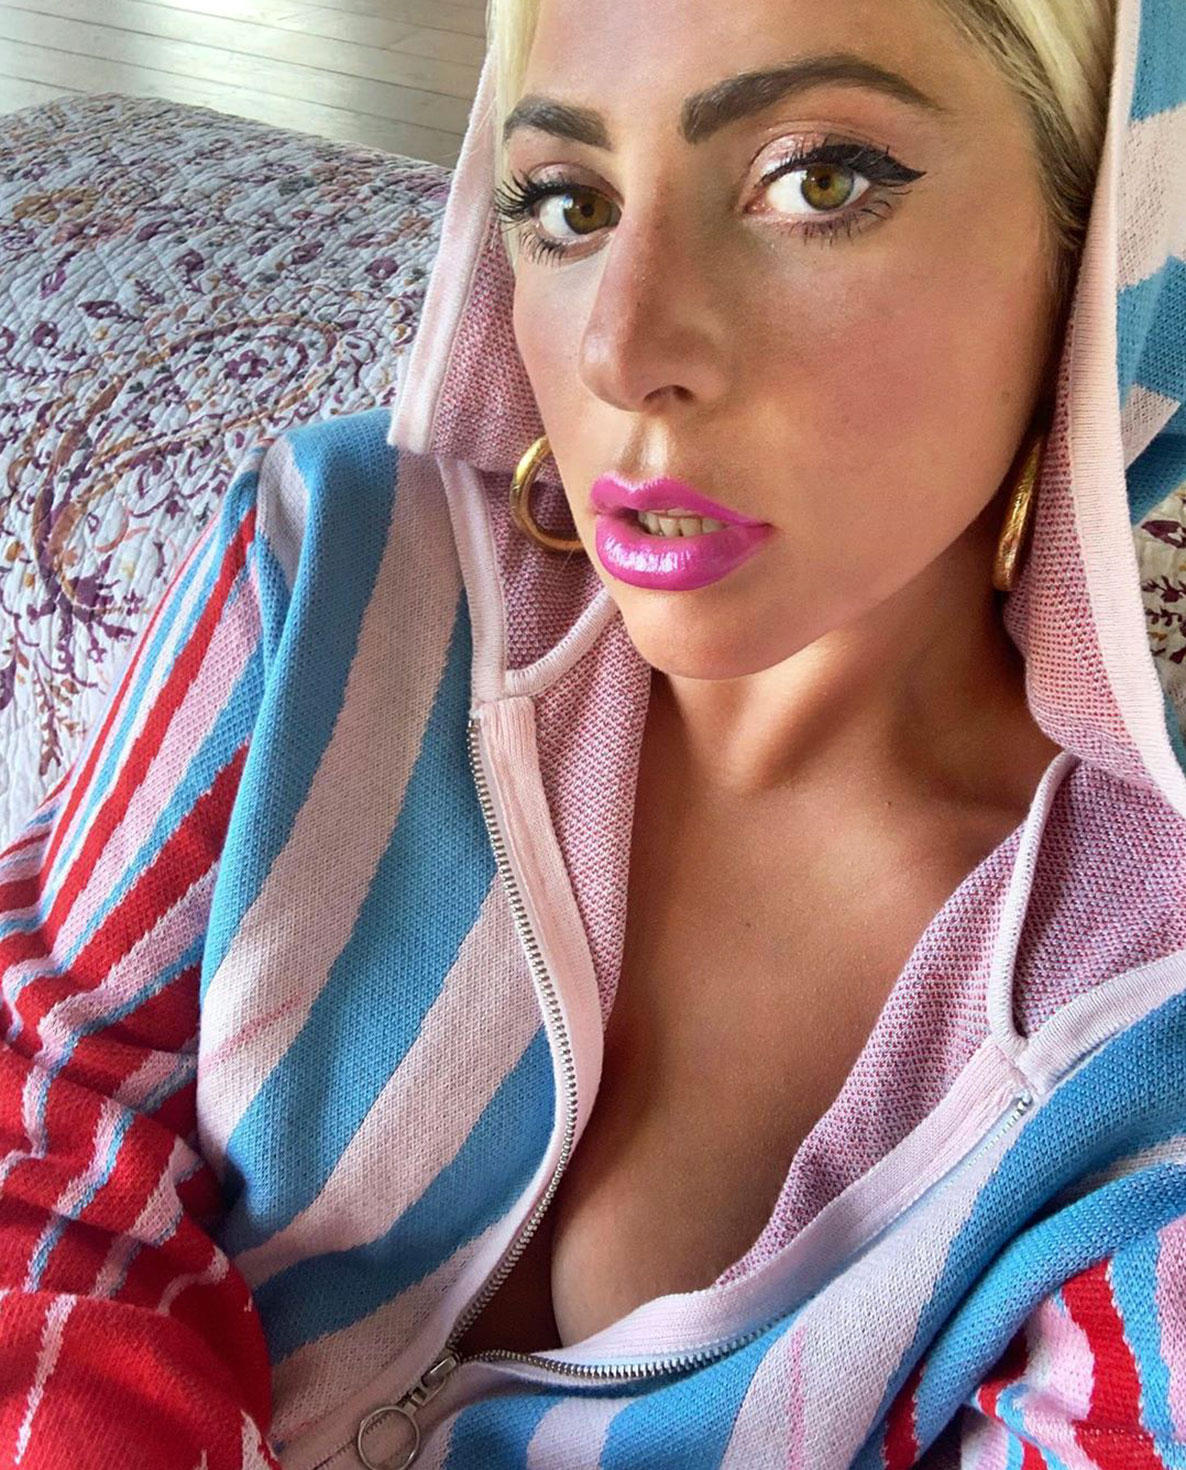 Lady Gaga Nude Pics Porn And Sex Scenes [2021 Update] Scandal Planet